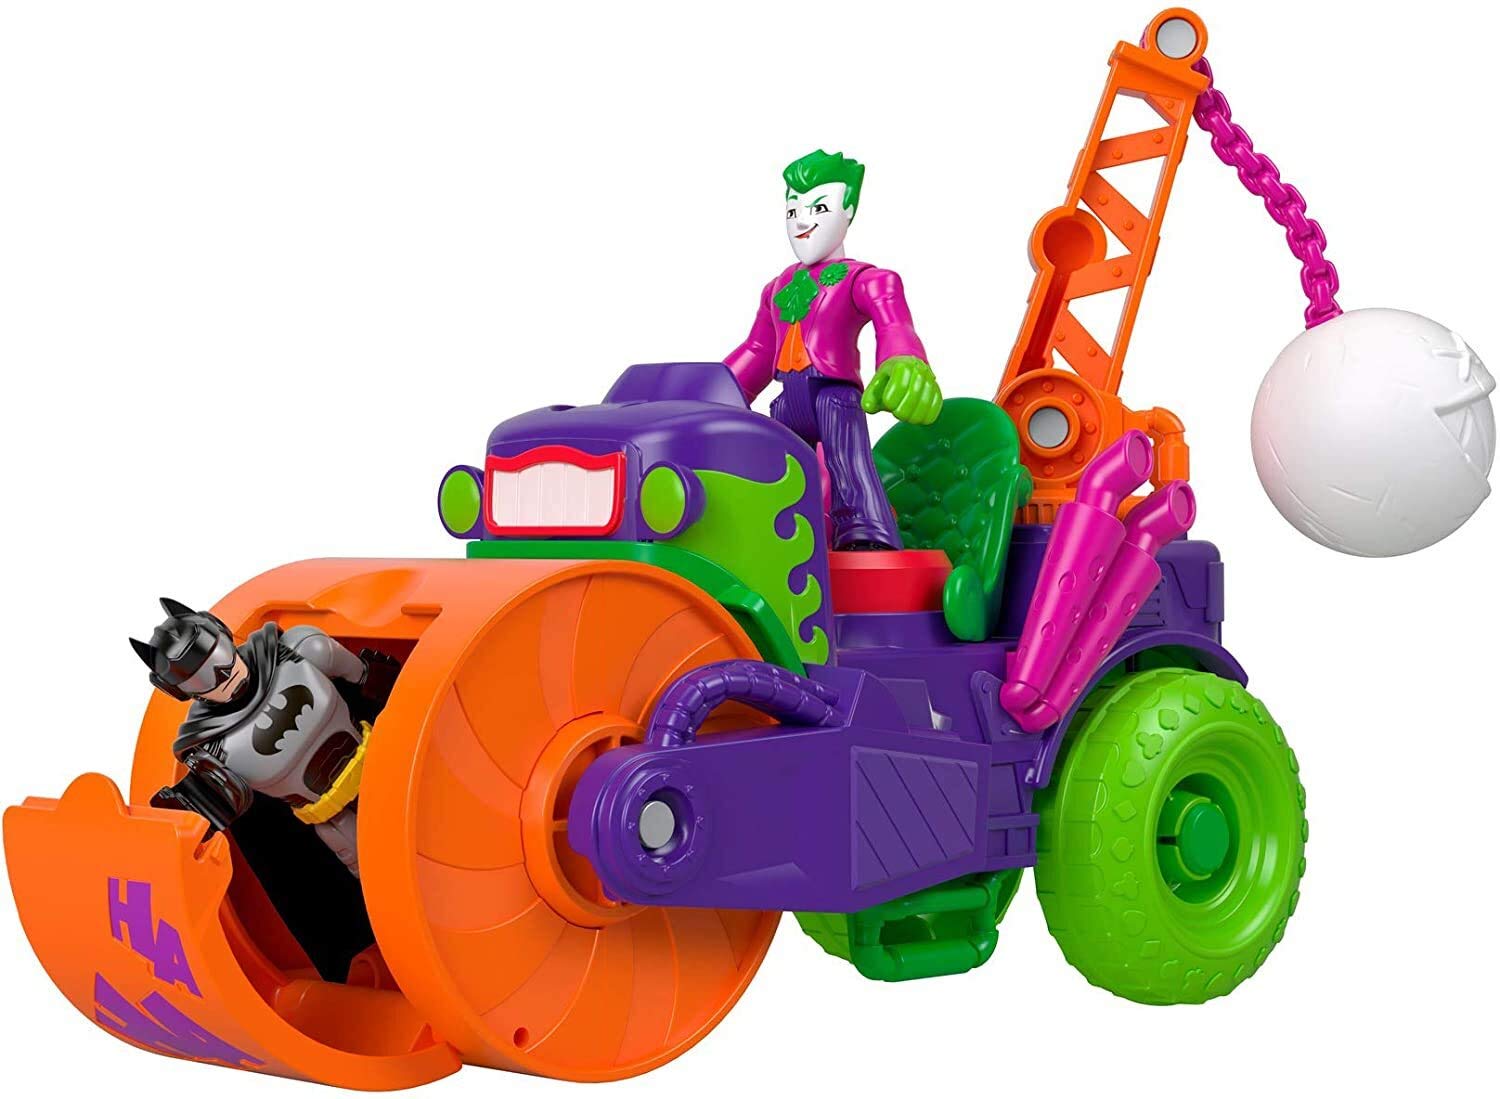 Fisher-Price Imaginext DC Super Friends The Joker Steamroller, Figure and Vehicle Set for Preschool Kids Ages 3 Years & up